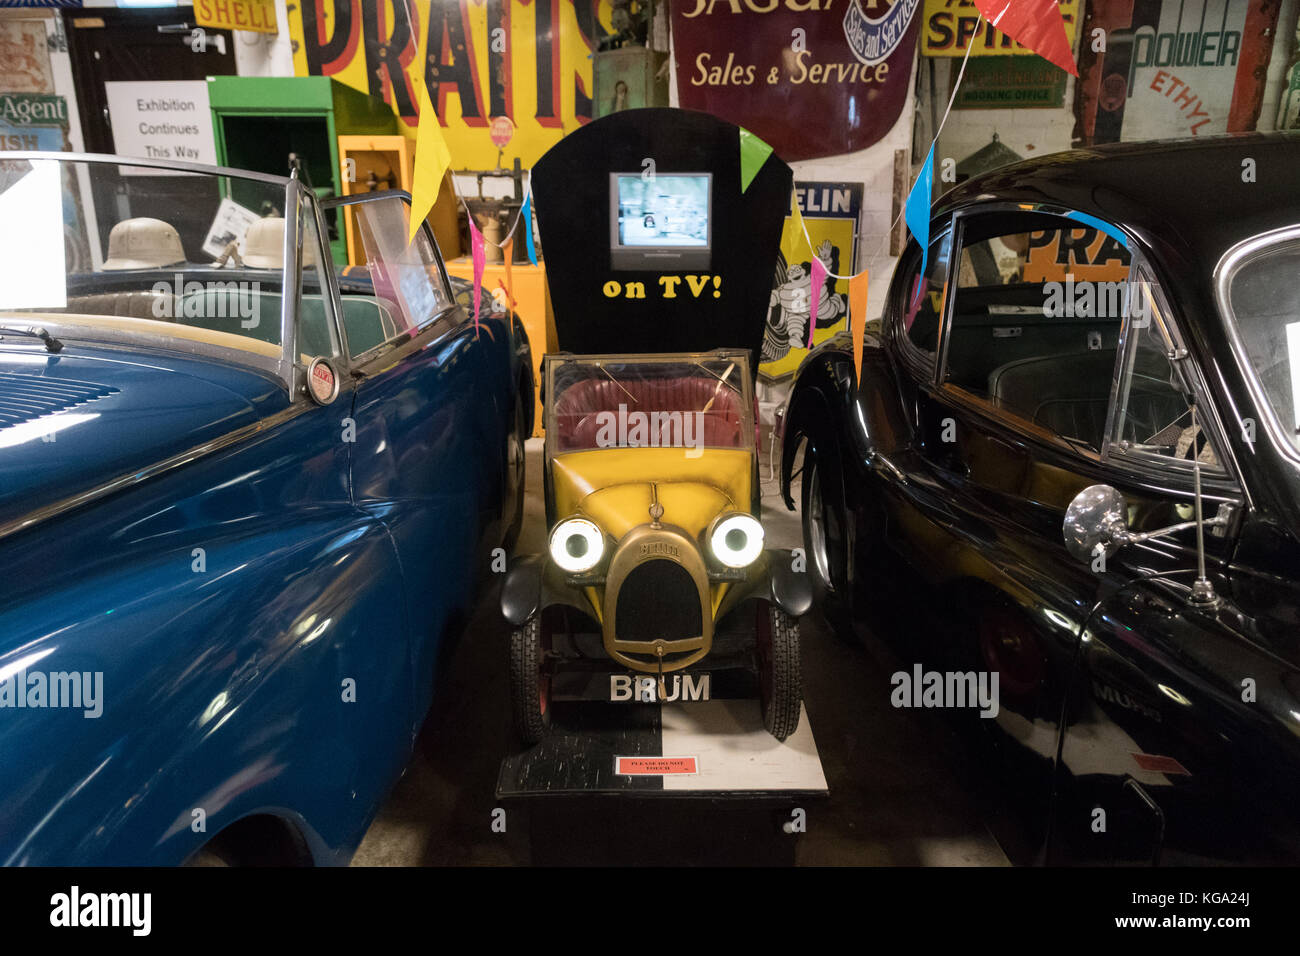 Brum al Cotswold Motoring Museum, Bourton on the Water, Gloucestershire, Inghilterra, Regno Unito Foto Stock